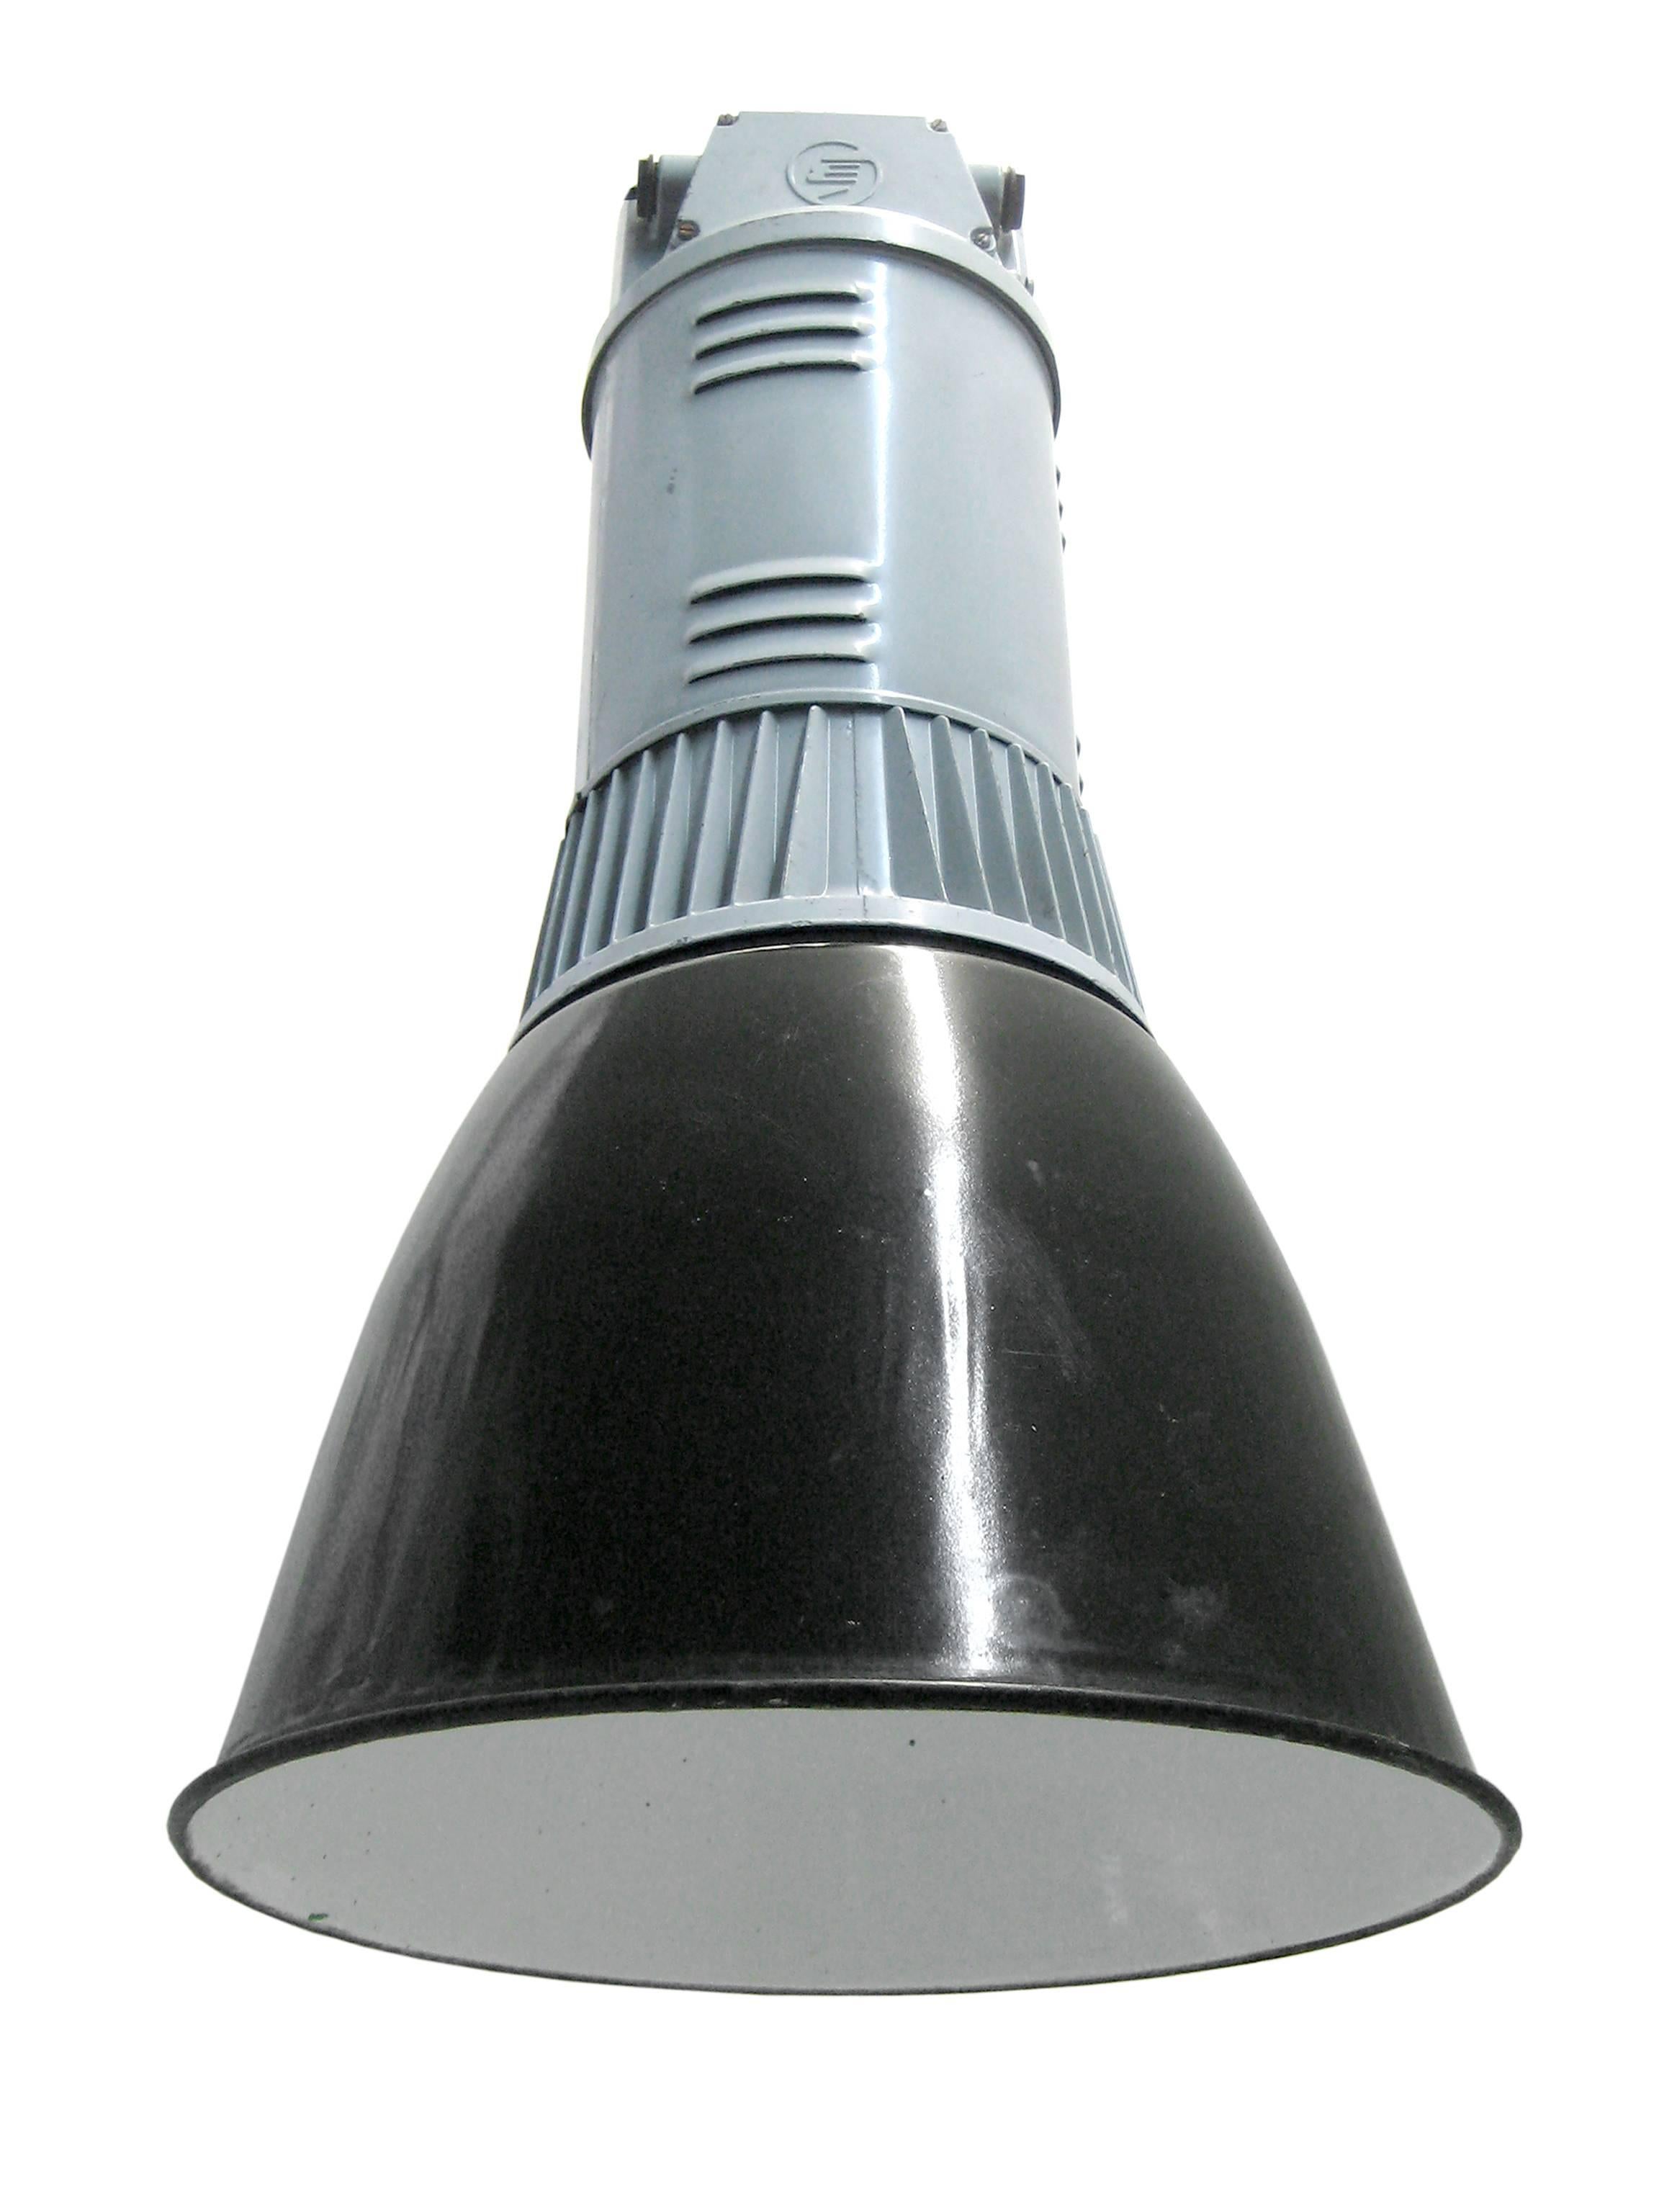 Industrial hanging lamp. Black enamel shade. Gray cast aluminum top.

Weight: 7.0 kg / 15.4 lb

Priced per individual item. All lamps have been made suitable by international standards for incandescent light bulbs, energy-efficient and LED